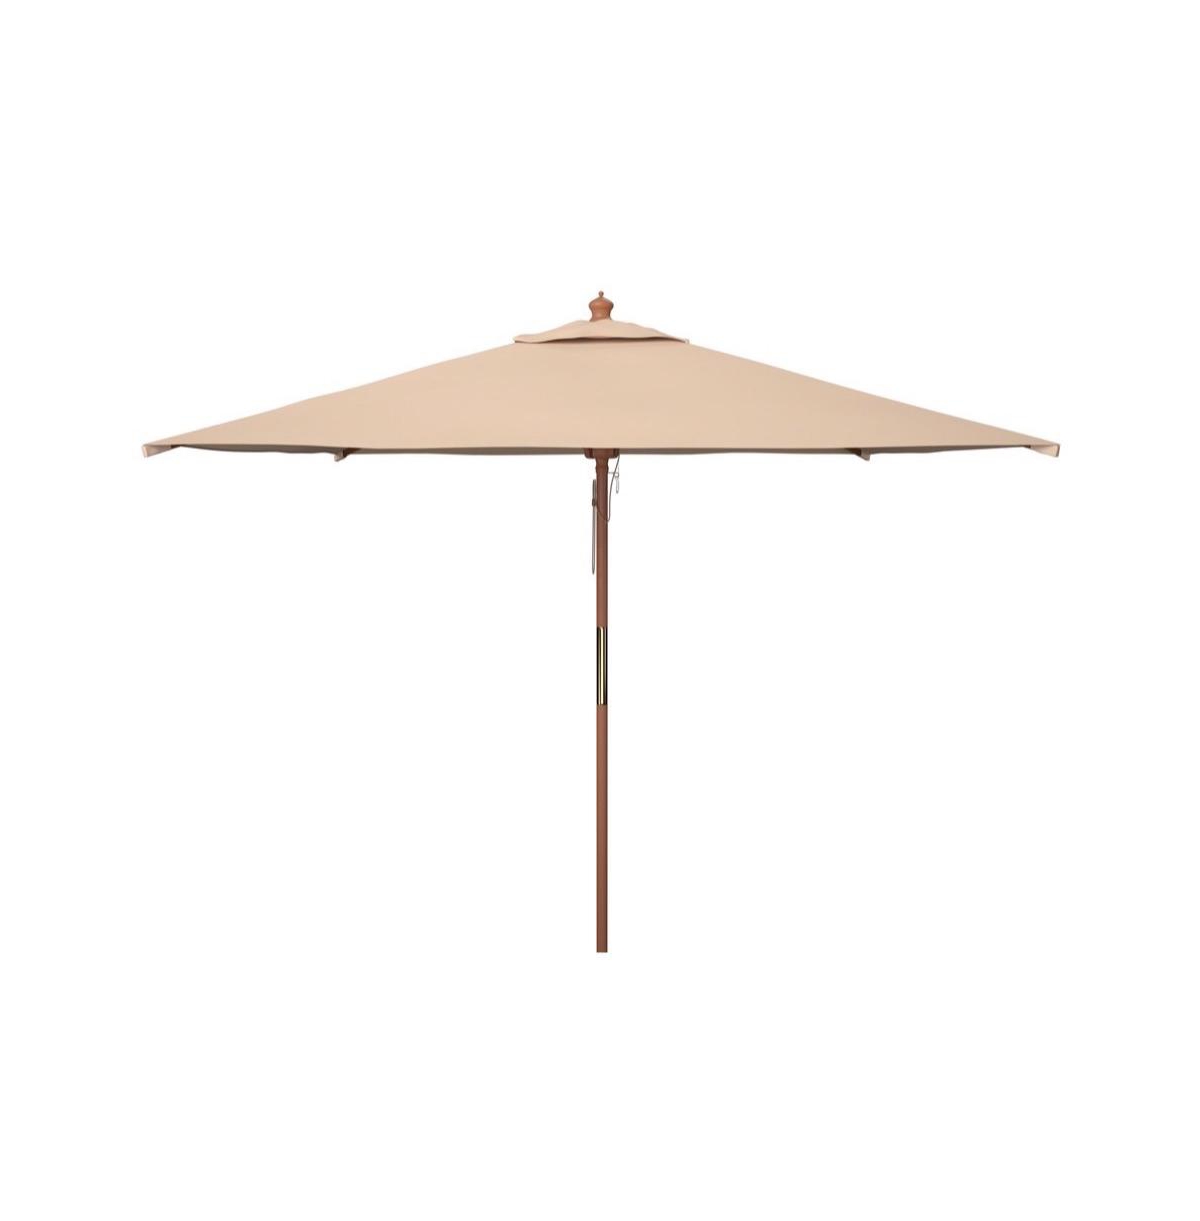 Velop 7.5 Ft Square Wooden Pulley Market Umbrella - Red